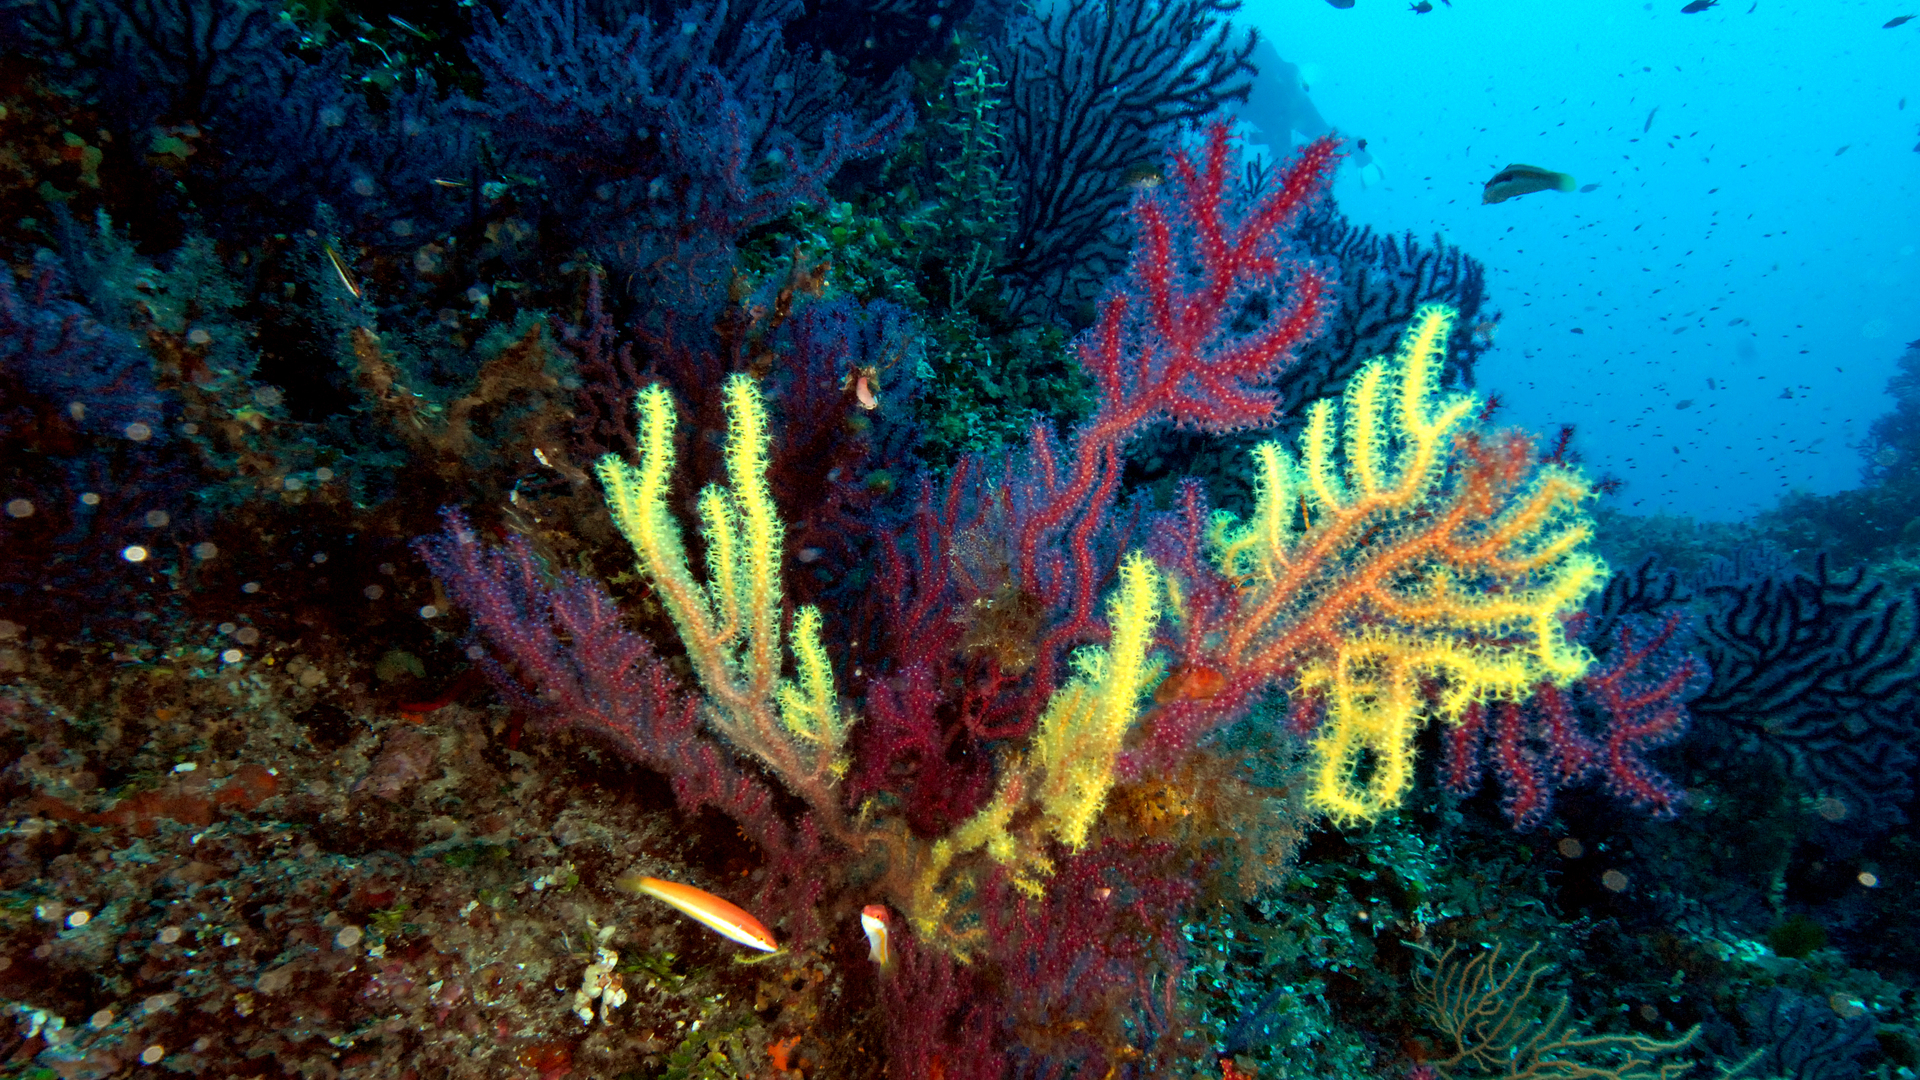 The sound of the Gorgonian Forests